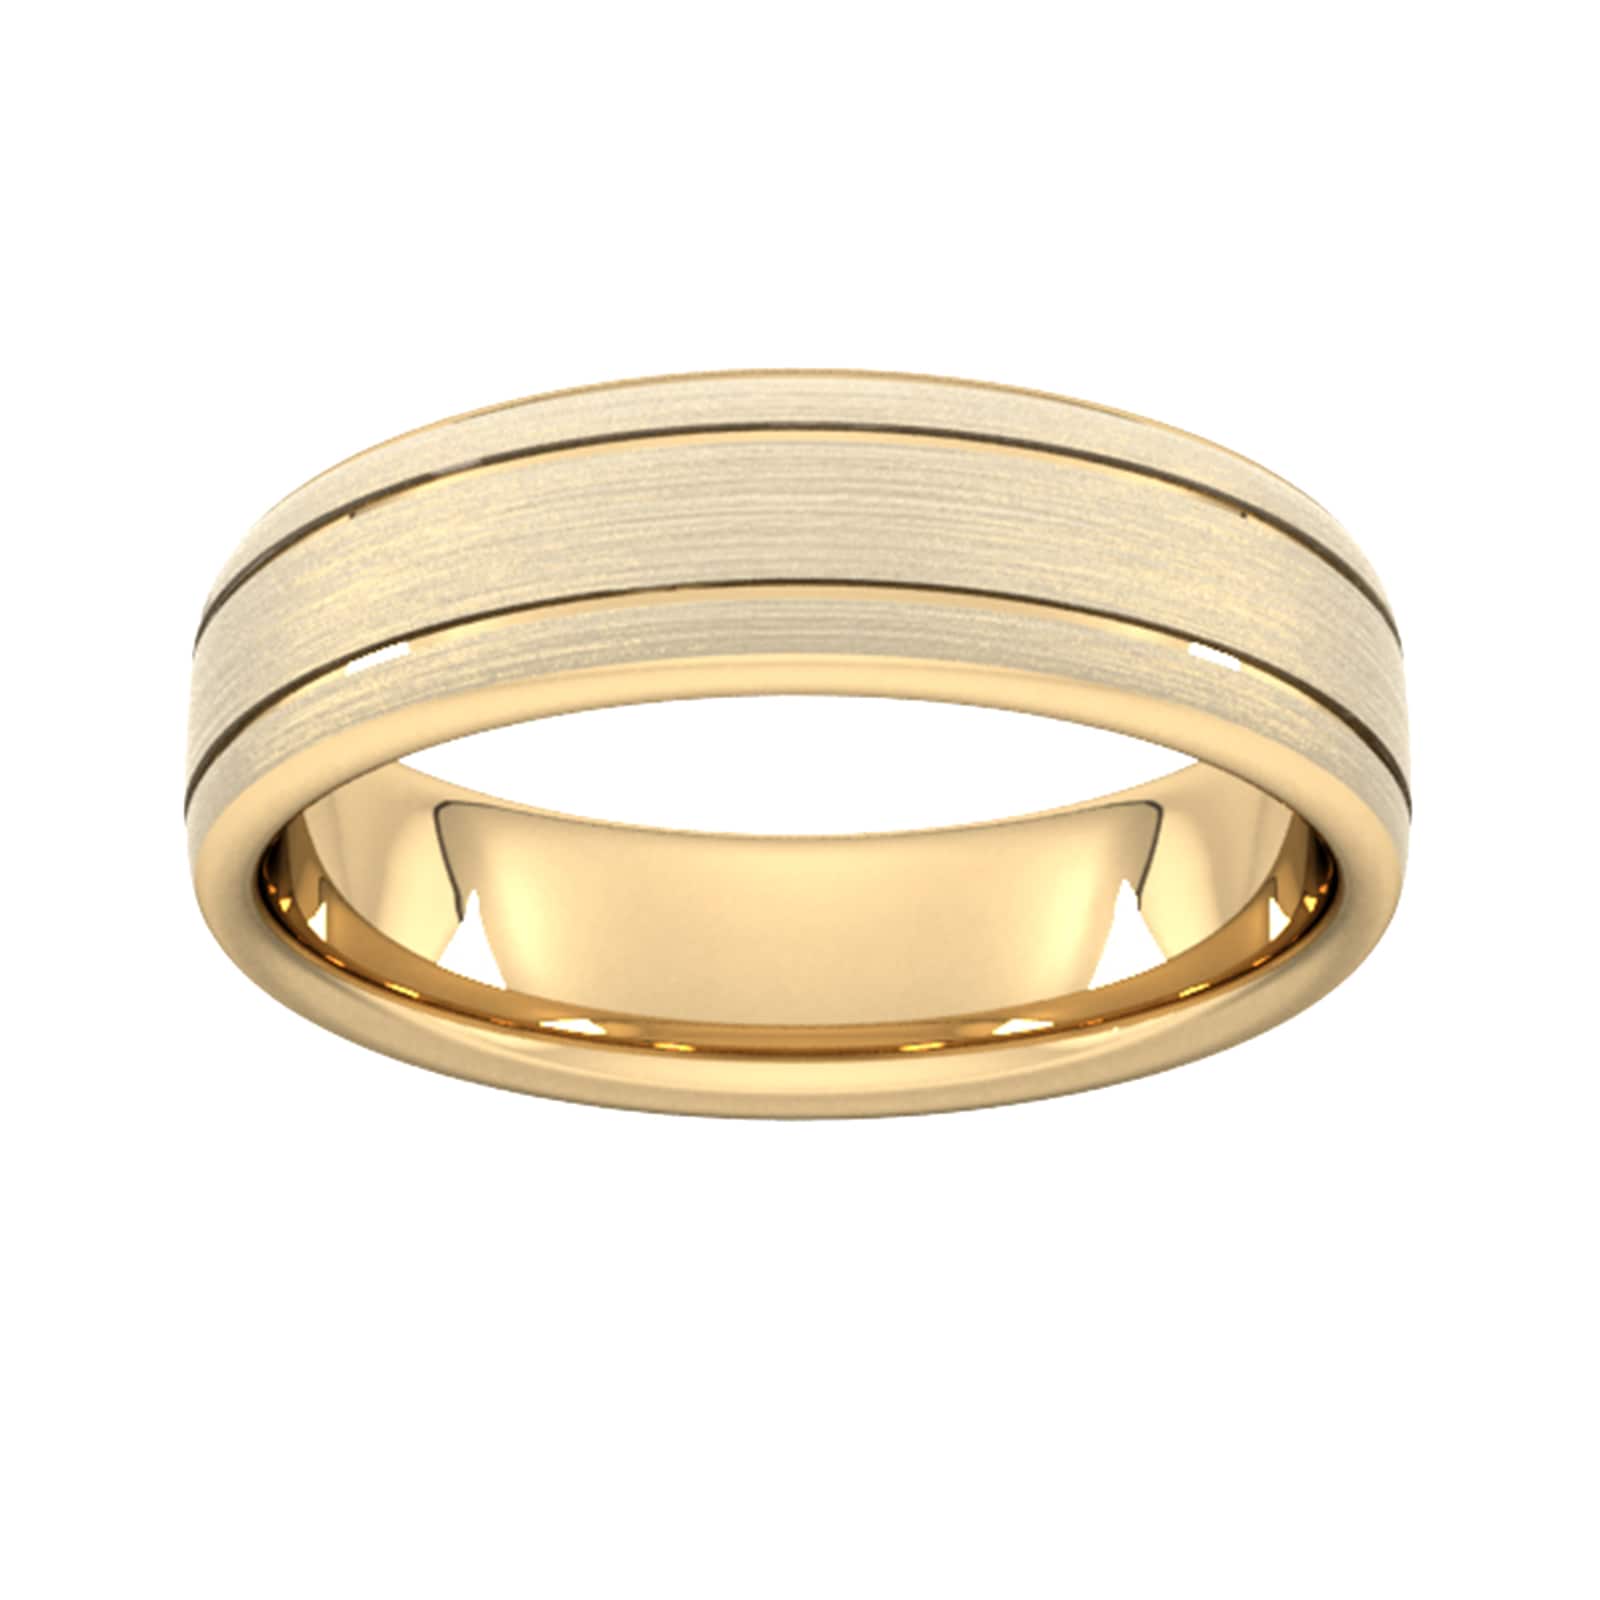 6mm D Shape Standard Matt Finish With Double Grooves Wedding Ring In 9 Carat Yellow Gold - Ring Size P